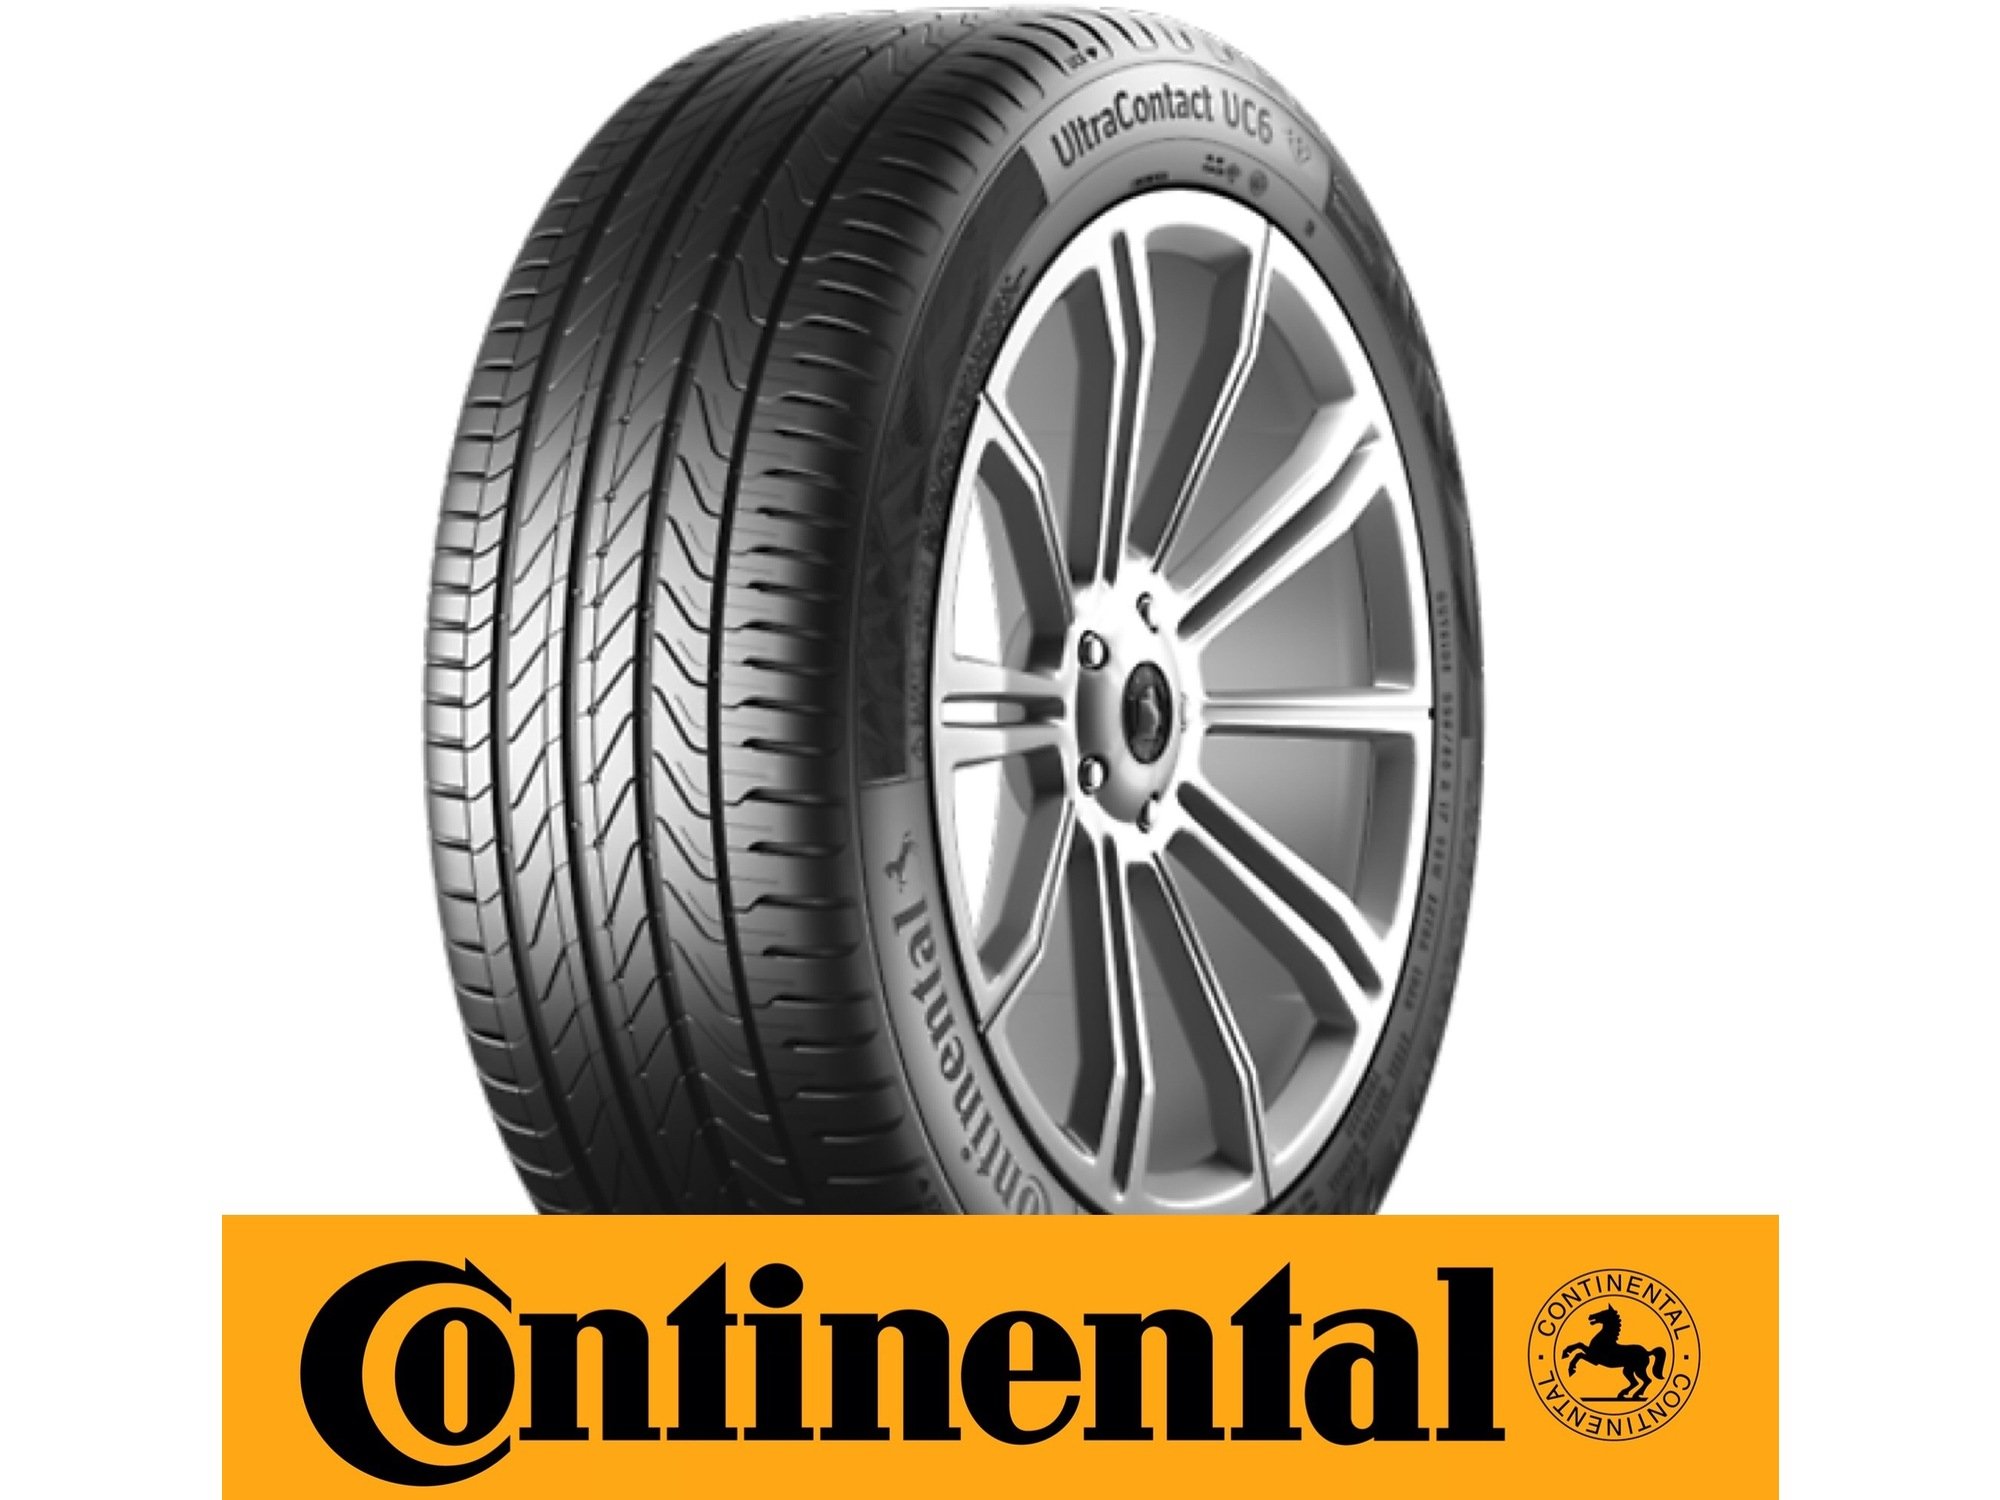 CONTINENTAL letne gume 195/65R15 91T UltraContact